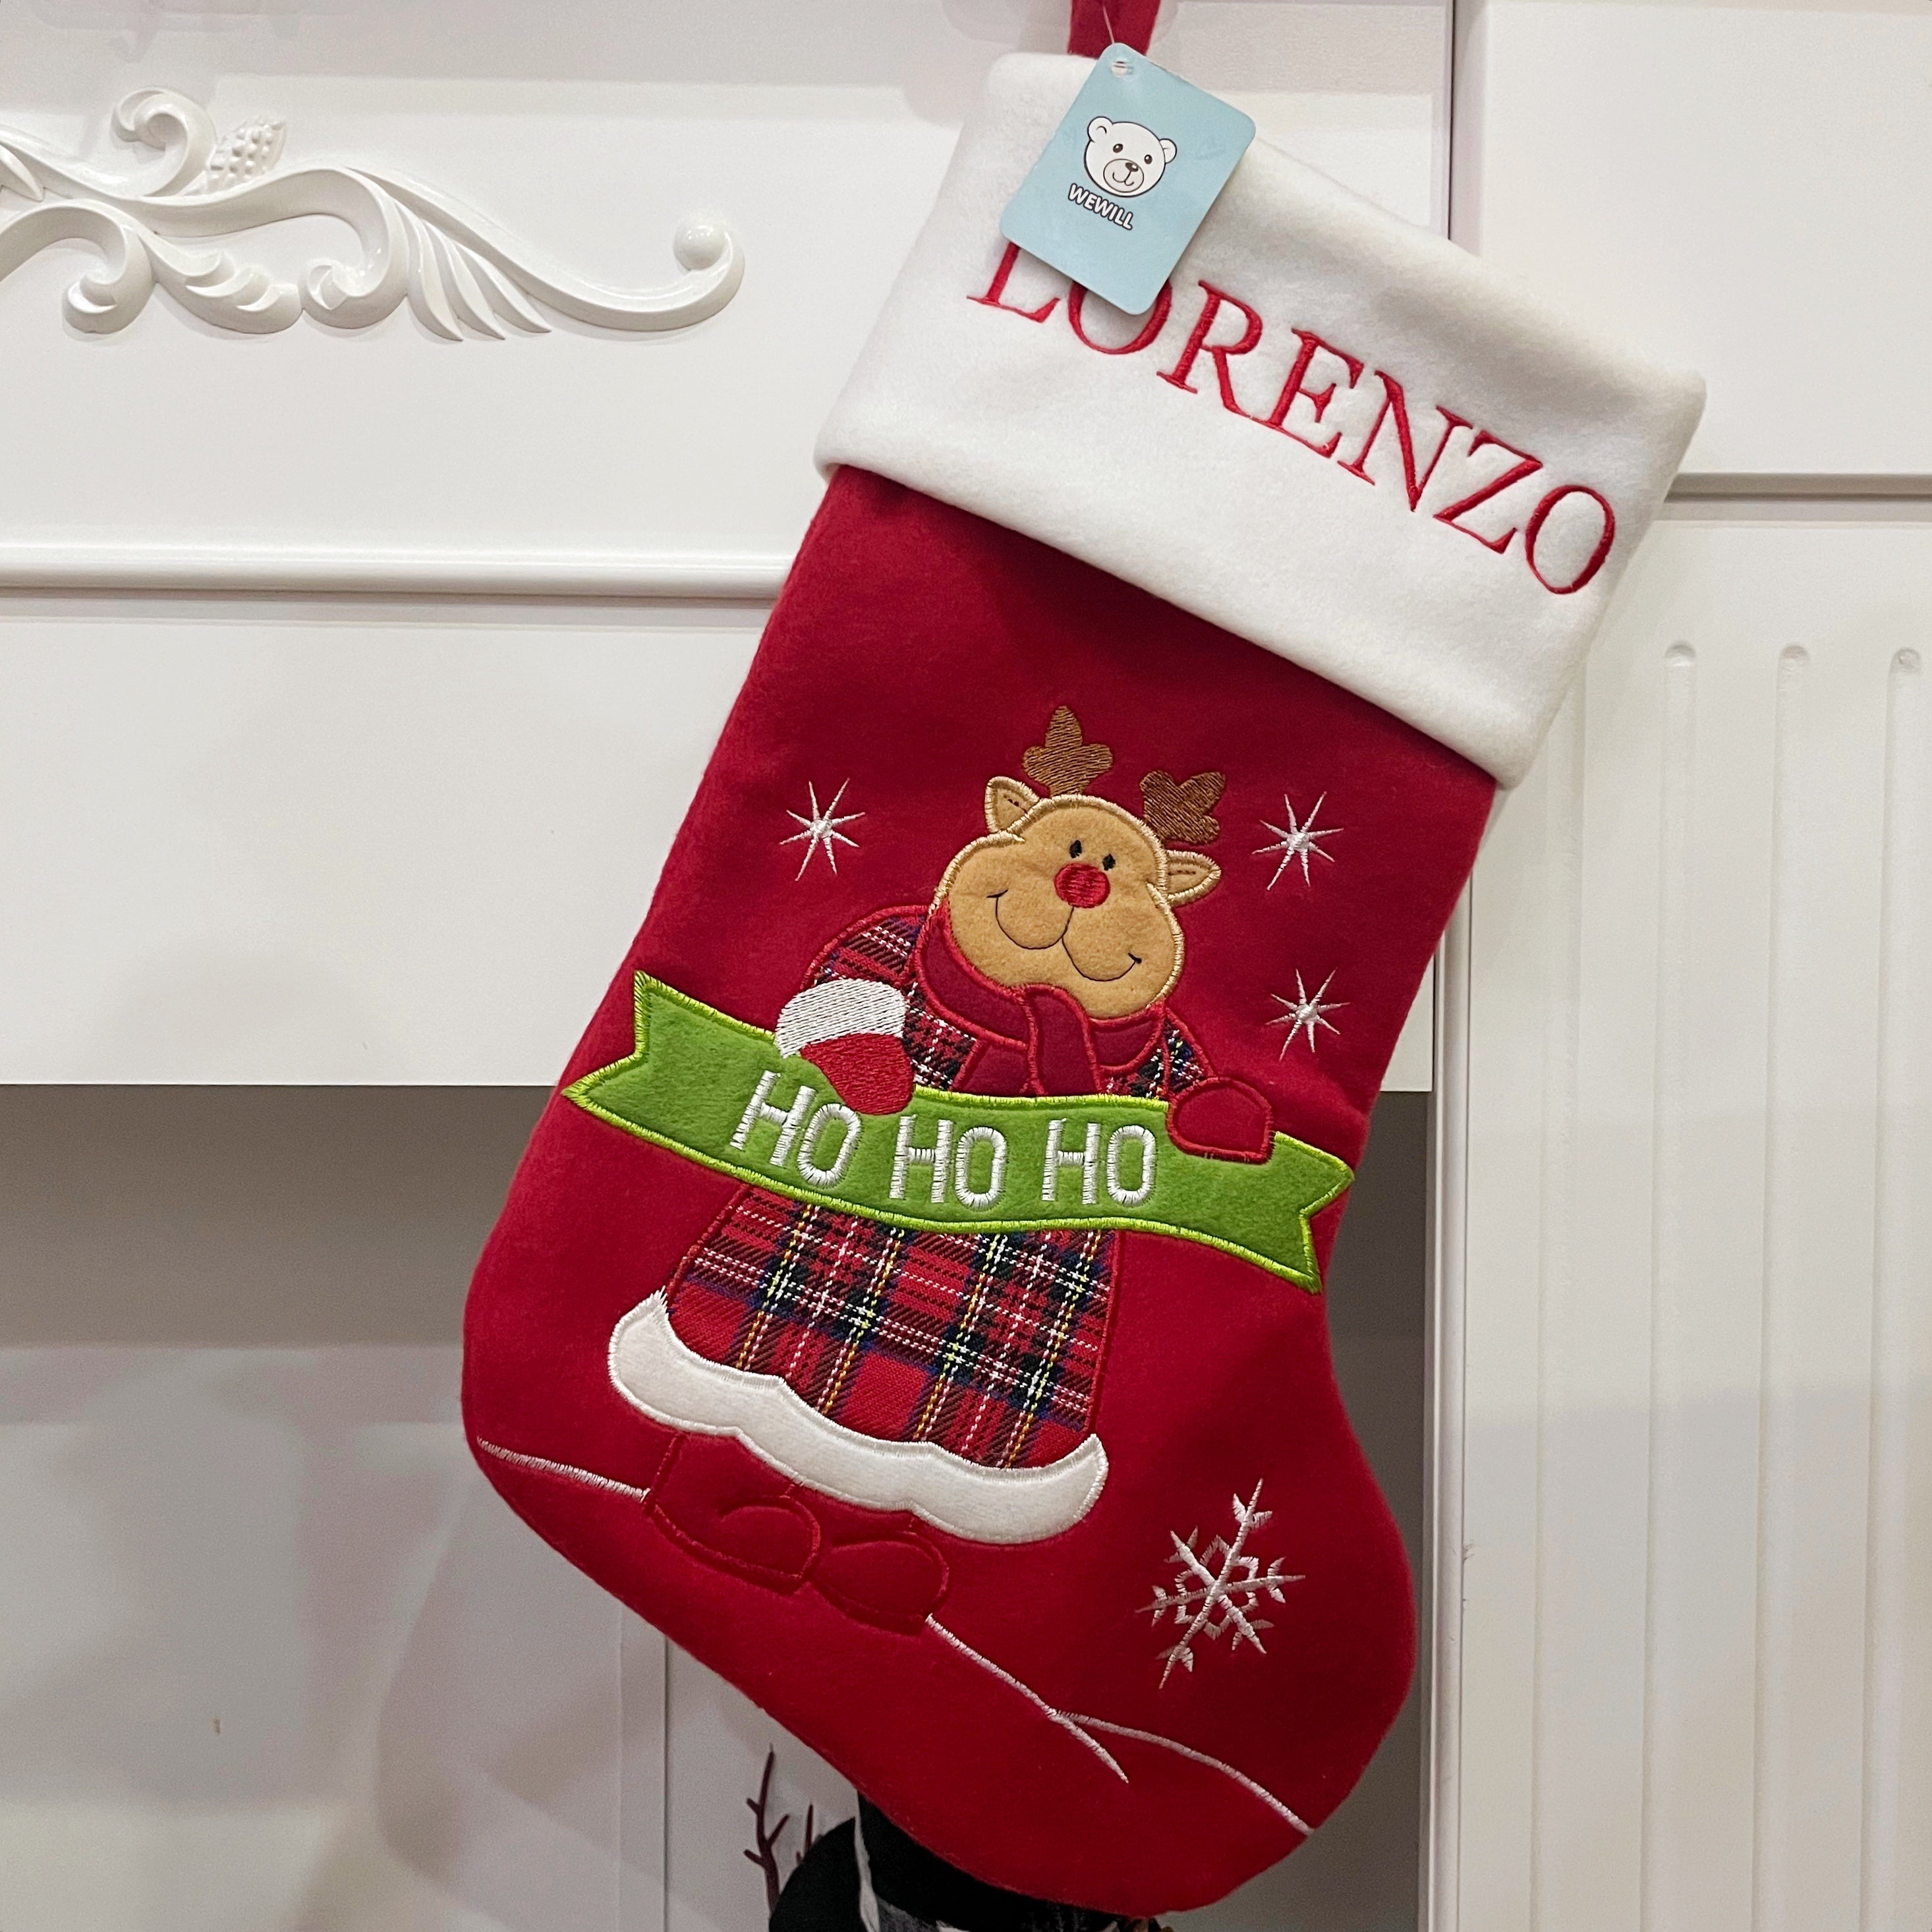 Wewill 2PCS 18" Christmas Stocking Classic Large Stockings Santa, Snowman, Reindeer Xmas Character for Family Holiday Christmas Party Decorations